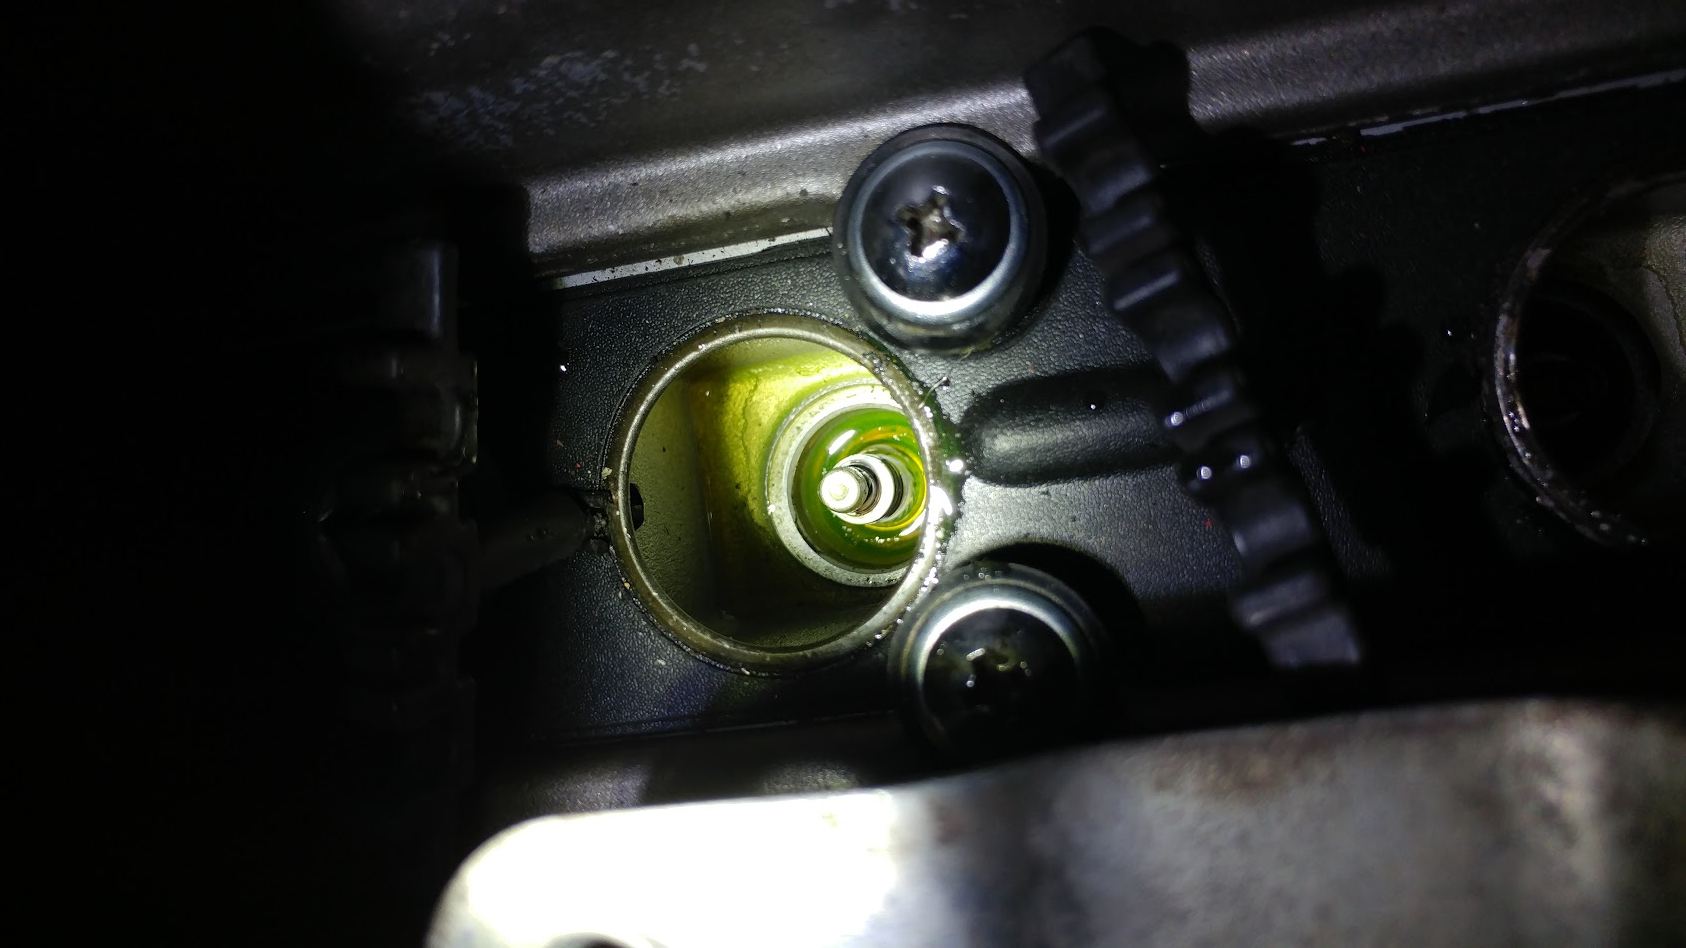 [SOLVED] What Causes Water in the Spark Plug Well?